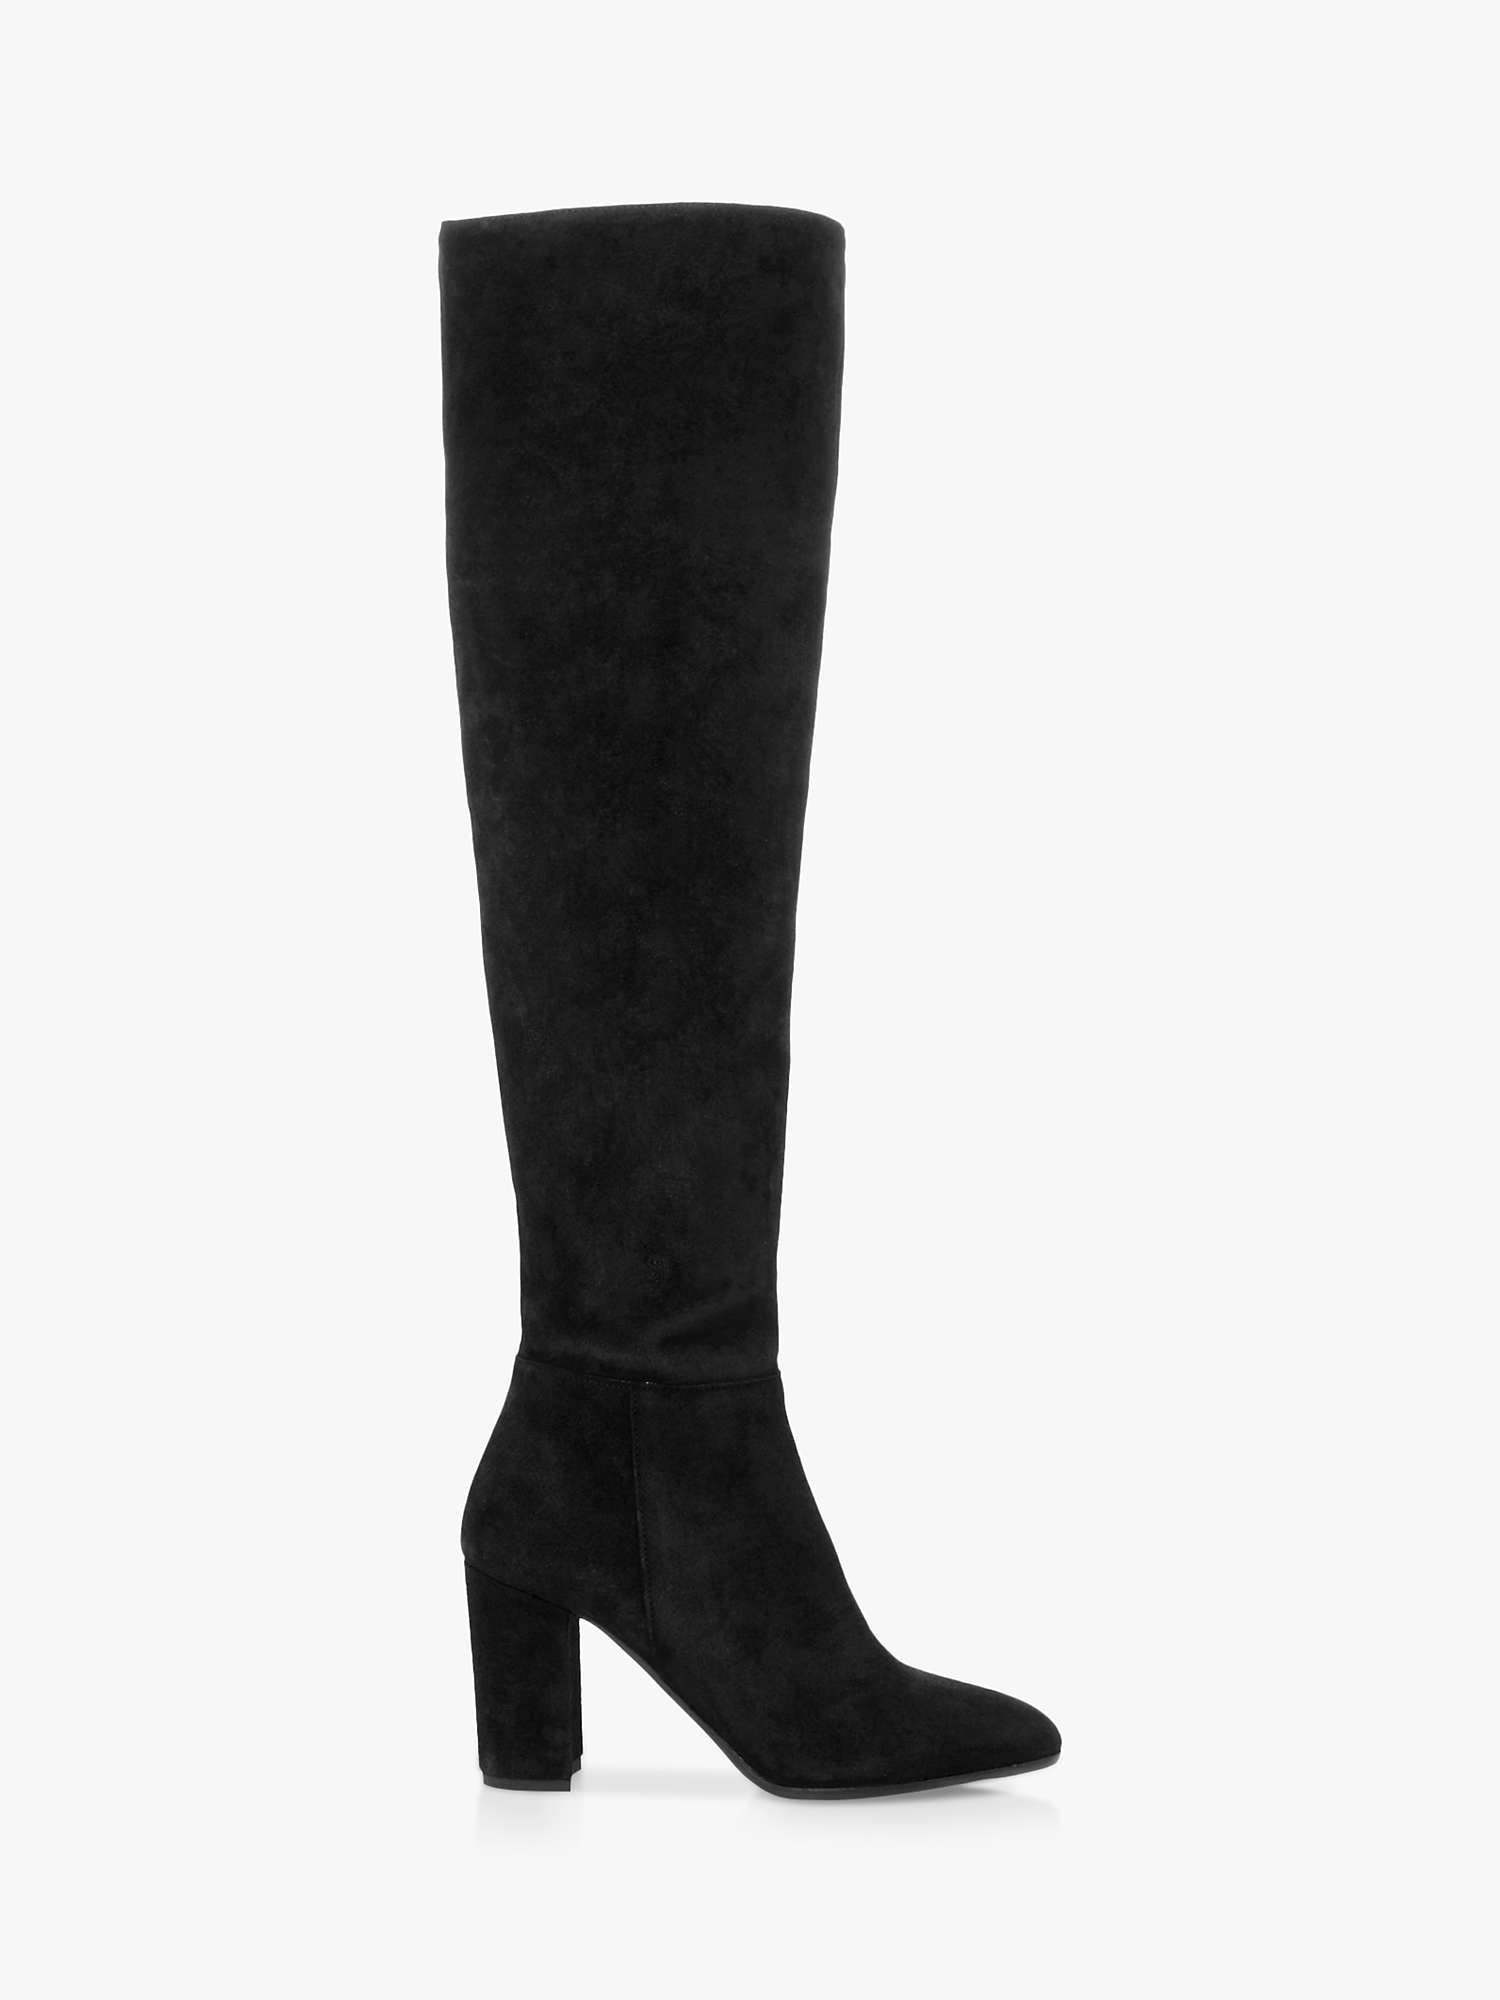 Dune Selsie Suede Over The Knee Boots, Black at John Lewis & Partners